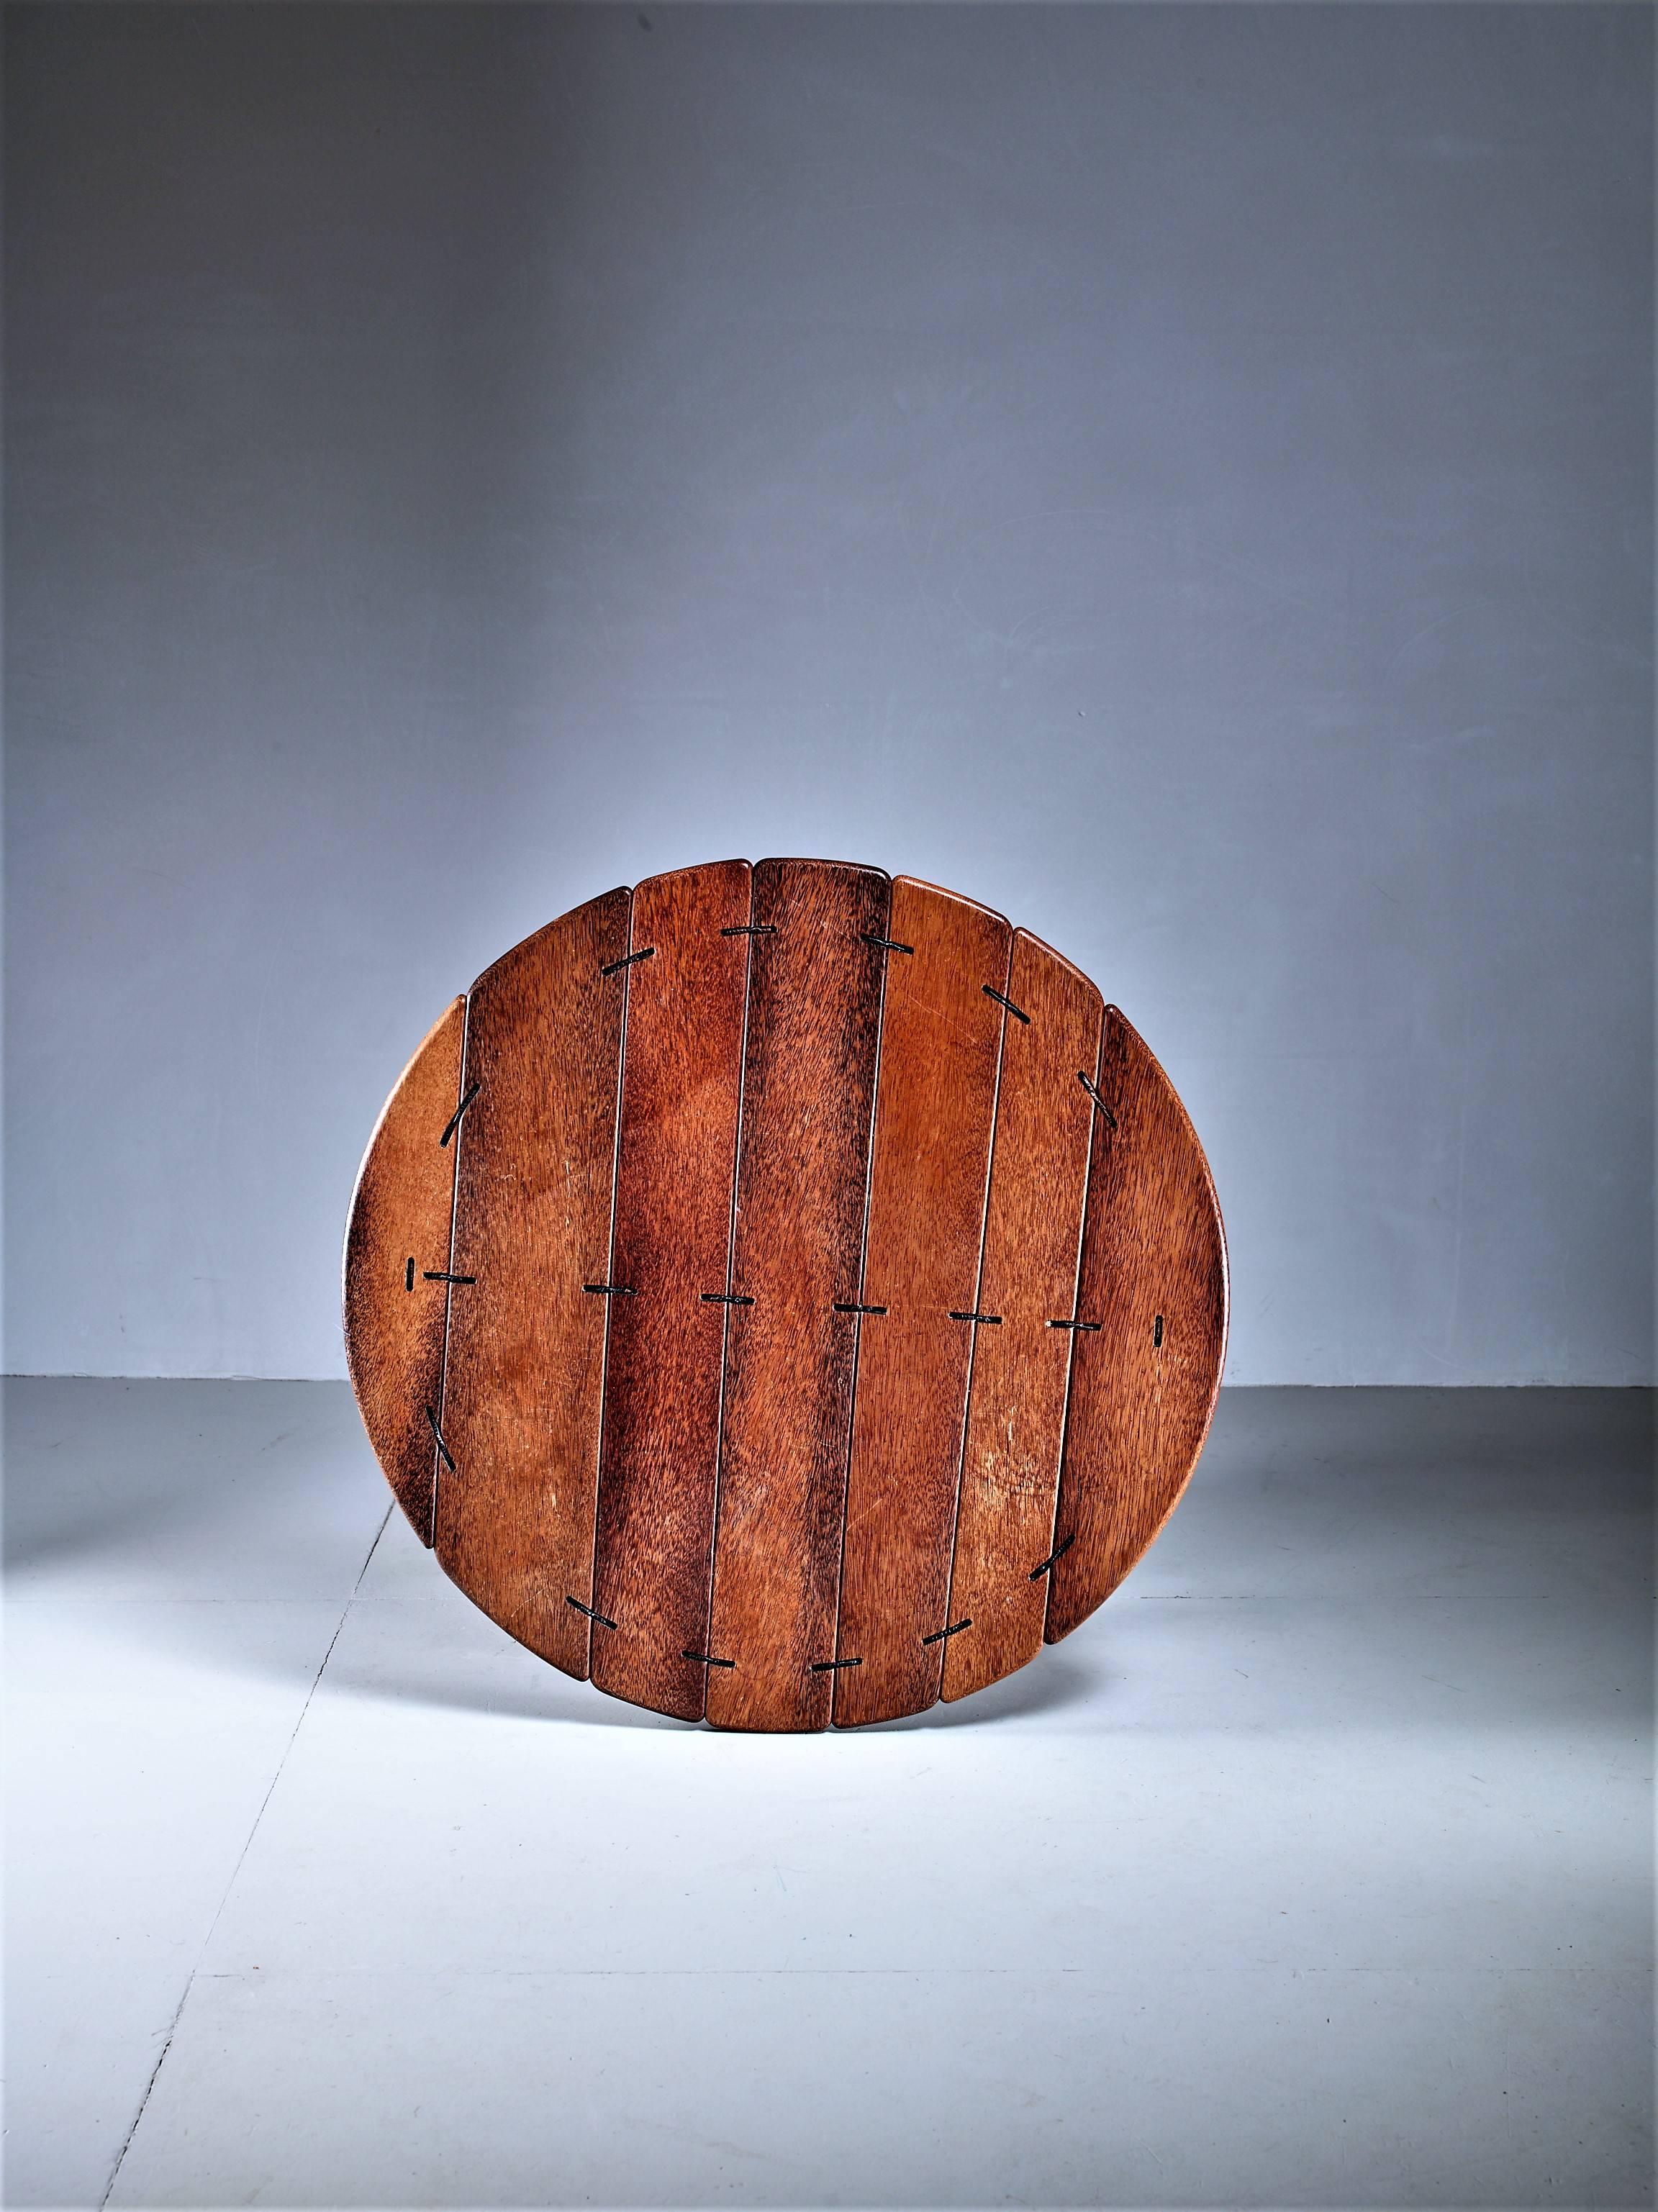 A large and round studio crafted coffee table in palmwood, from Australia
The table has a steel frame and the wood parts are connected with rope and leather.
